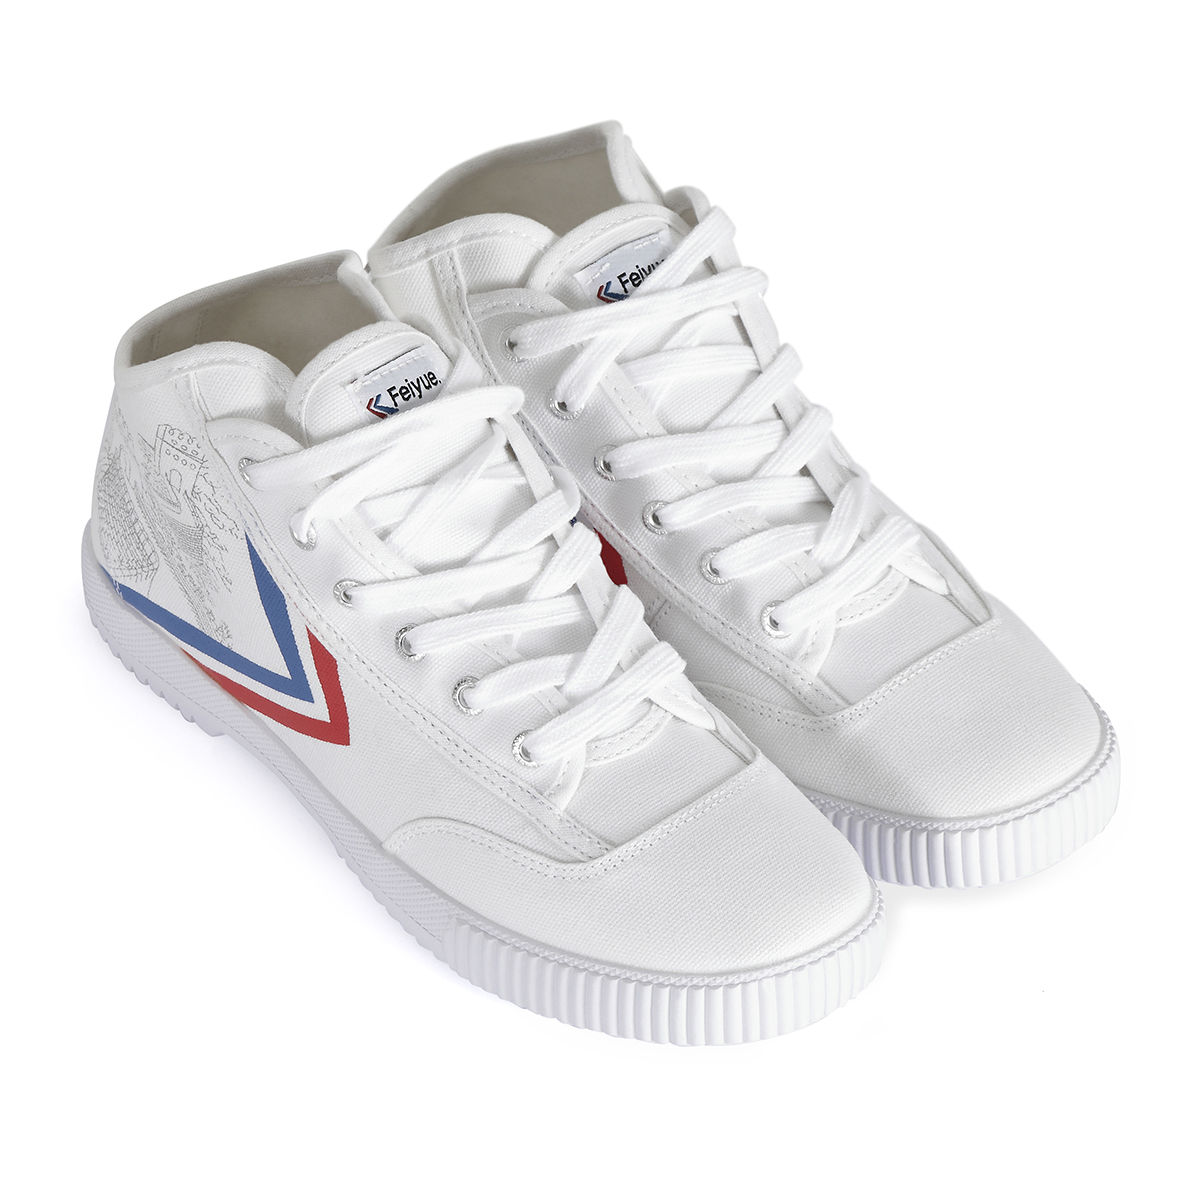 High Top Feiyue Vintage Wushu Training Shoes : White - Click Image to Close